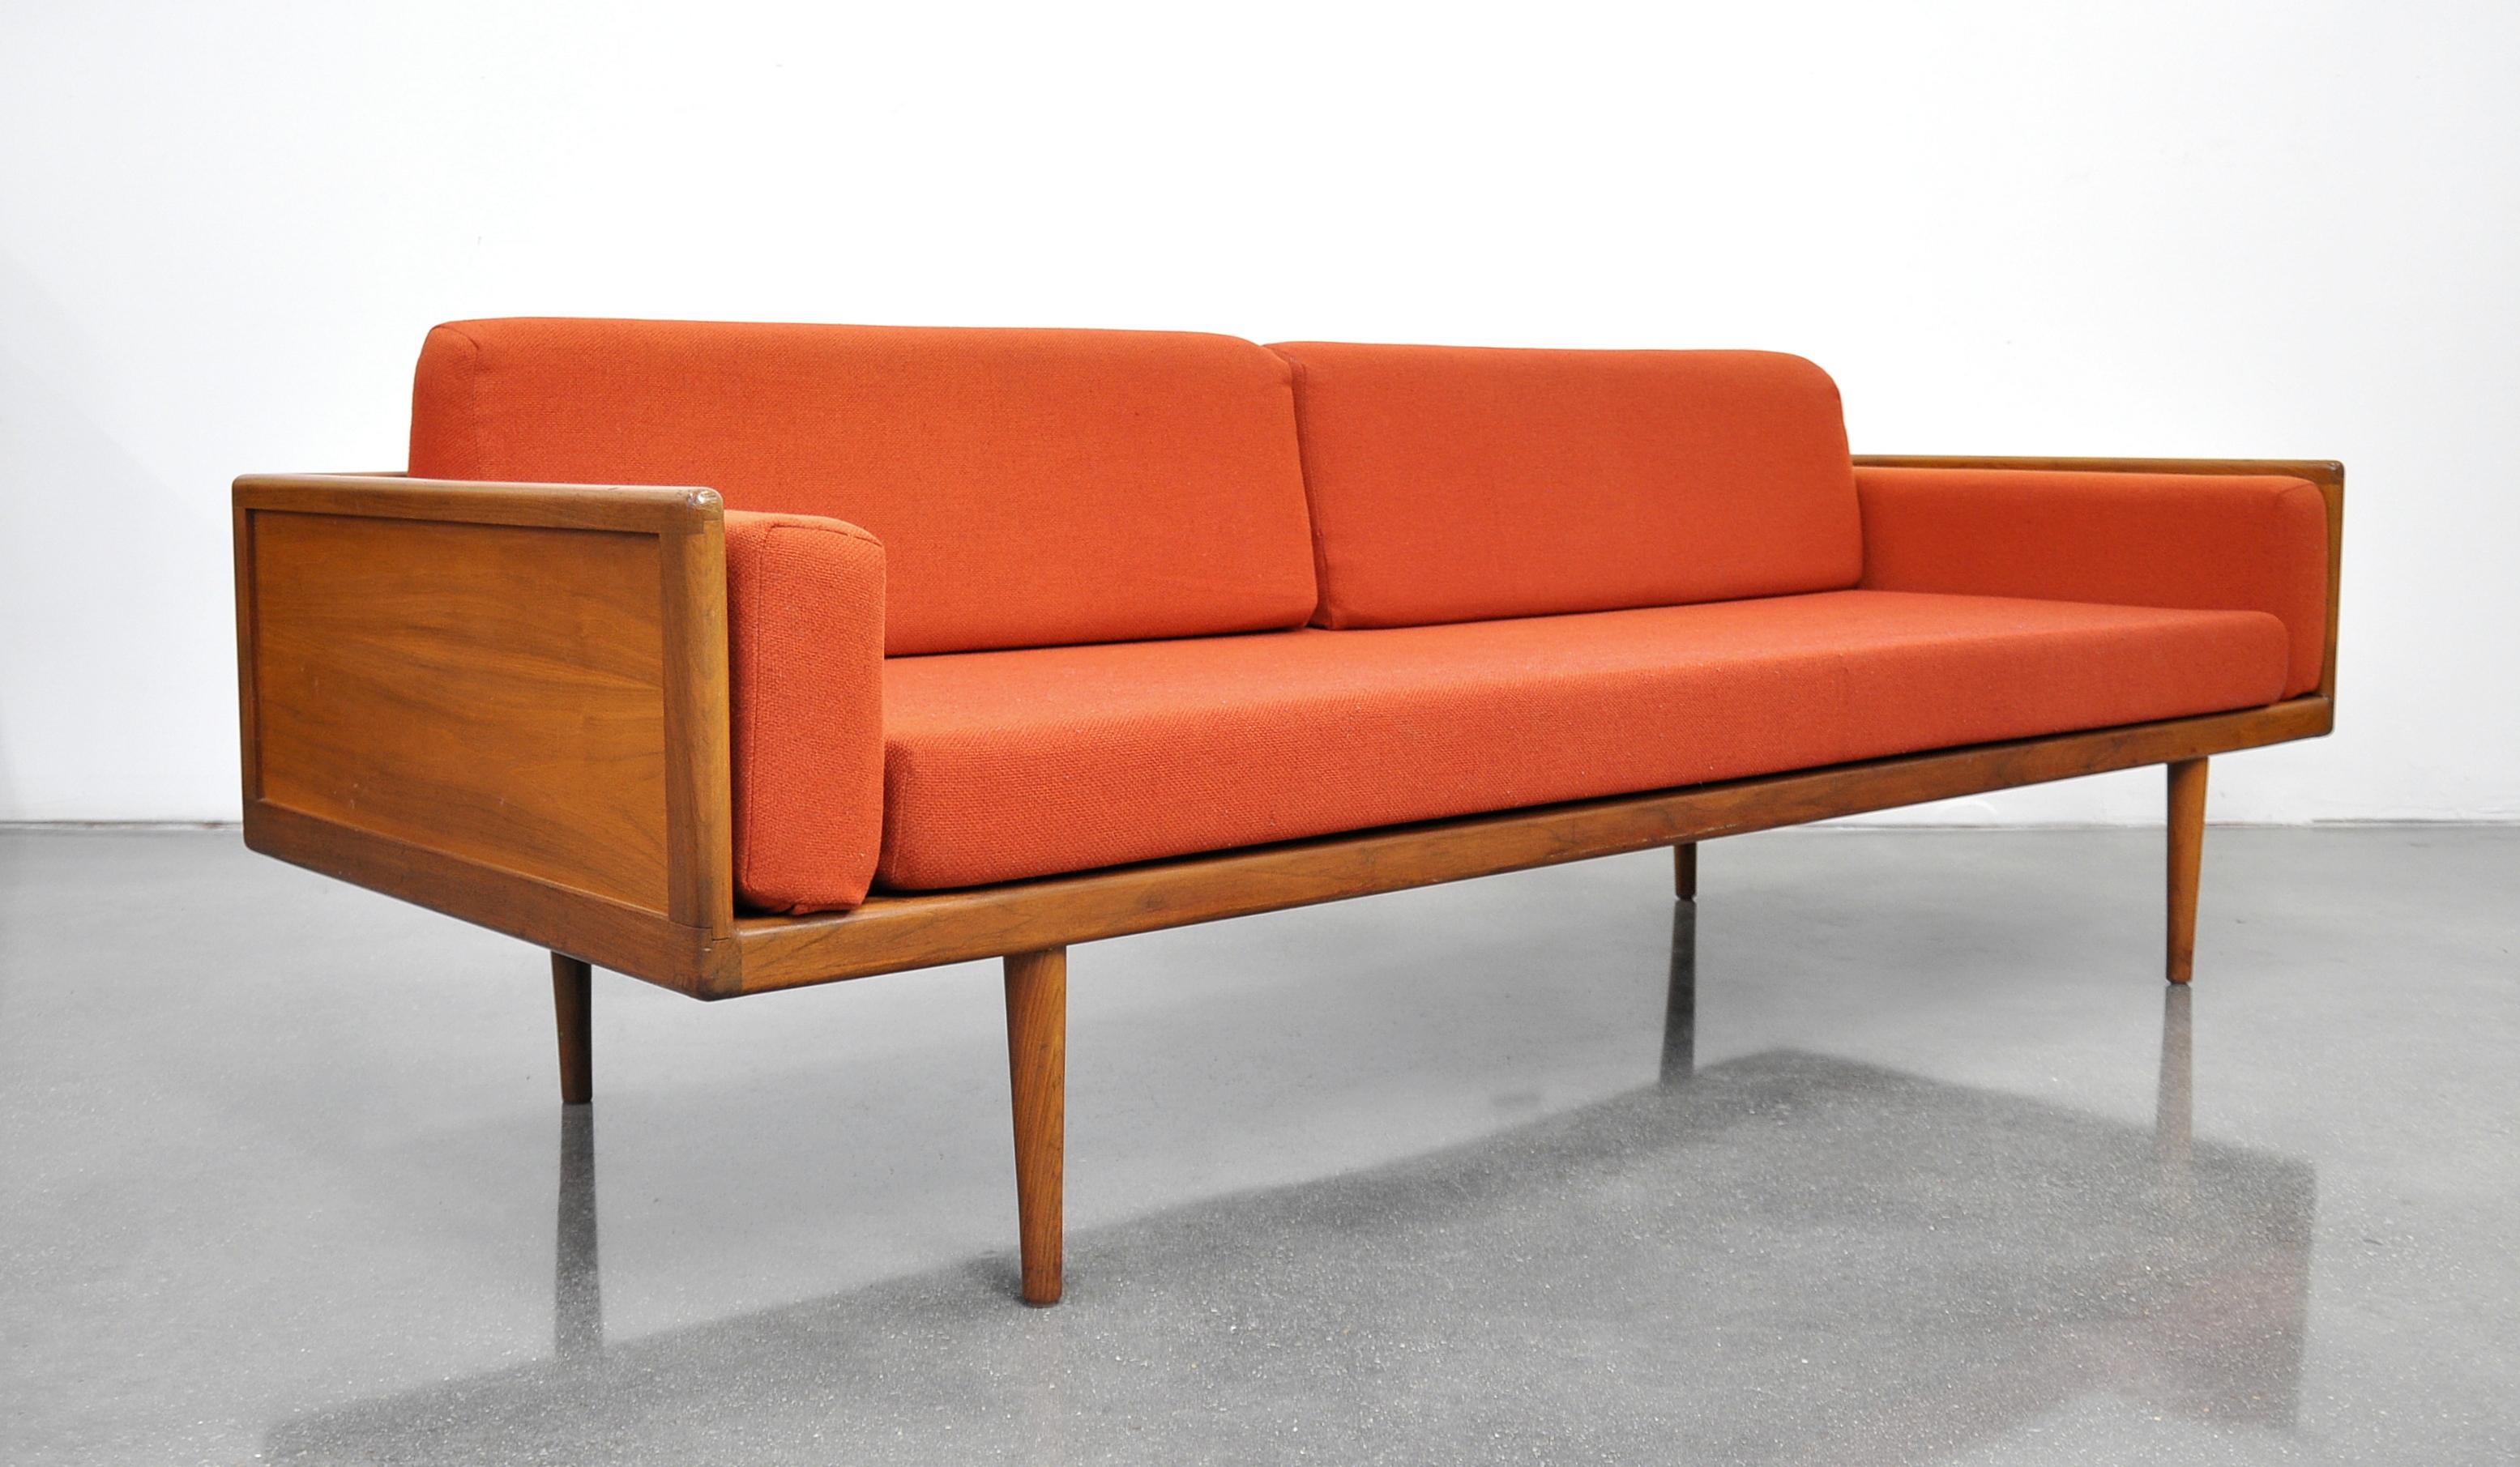 A stunning and rare vintage Mid-Century Modern box sofa, designed by Mel Smilow and dating from the 1950s. The couch features an exposed solid walnut case raised on slender tapered legs, imparting a Minimalist aesthetic to the floating design.